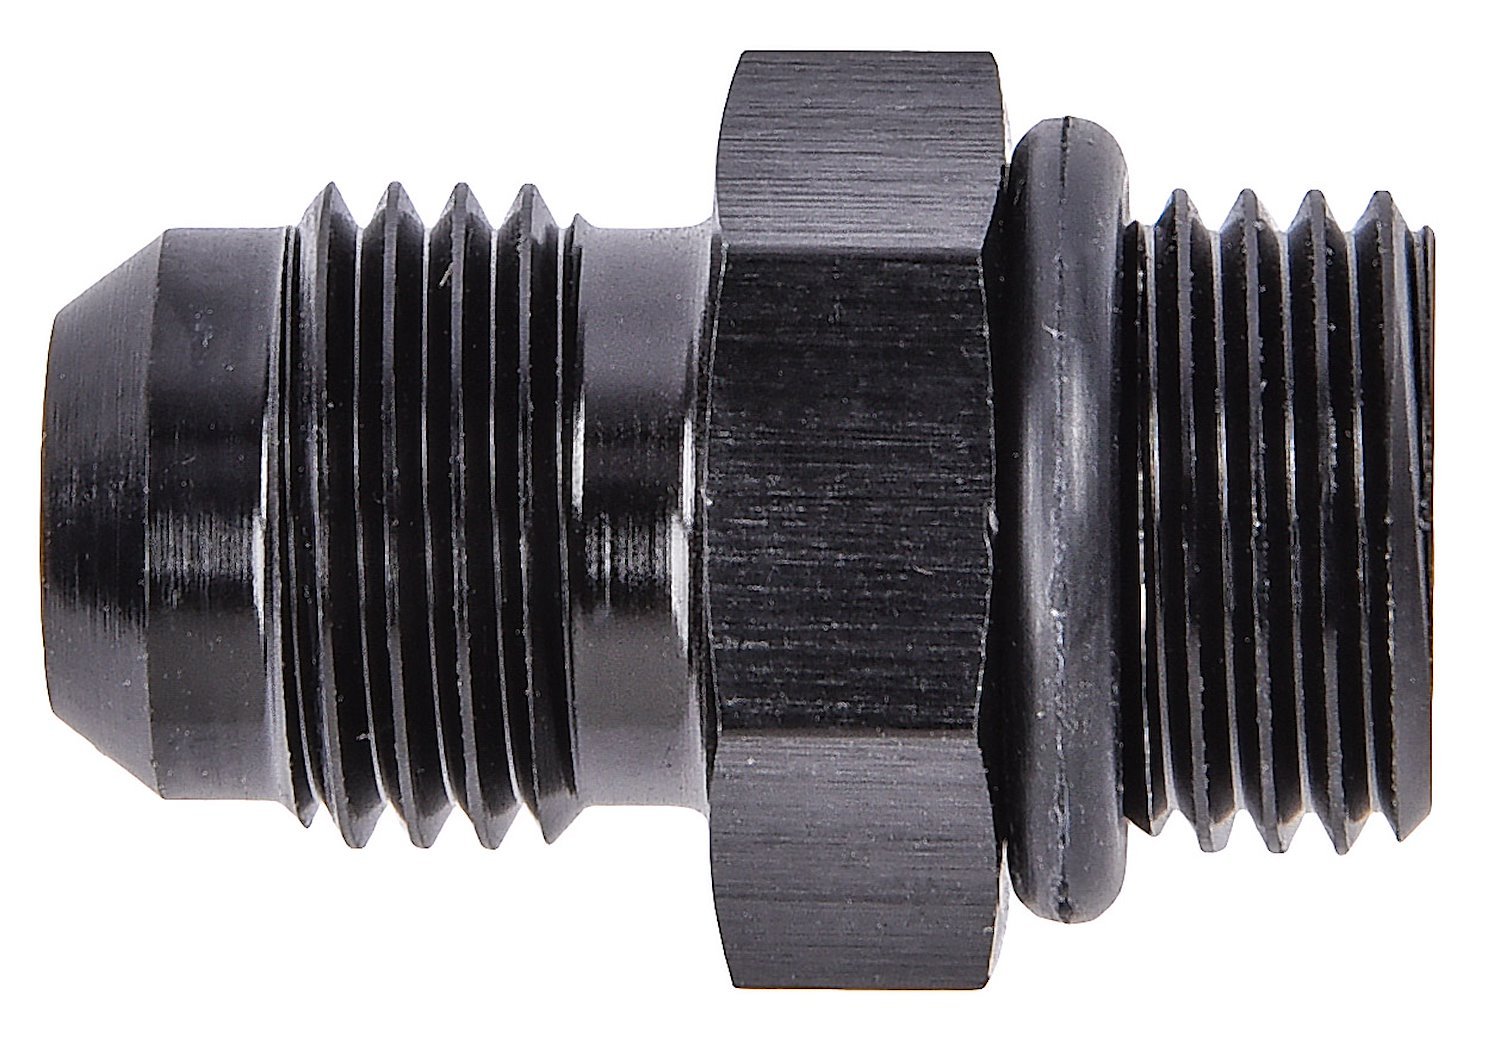 AN Port Adapter Fitting [-6 AN O-Ring Port